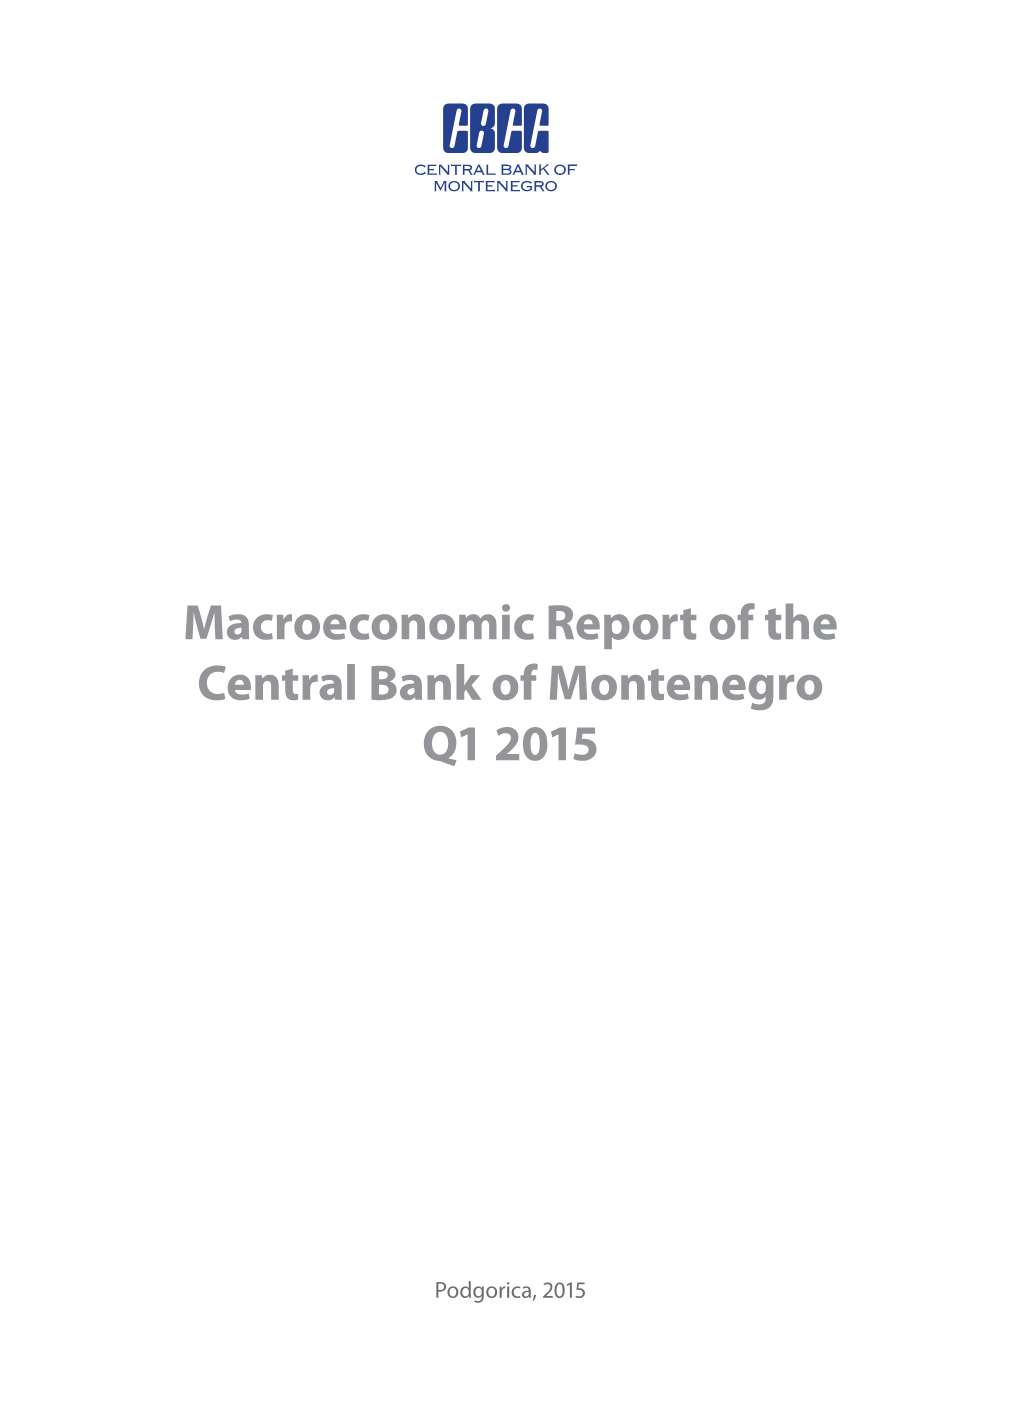 Macroeconomic Report of the Central Bank of Montenegro Q1 2015